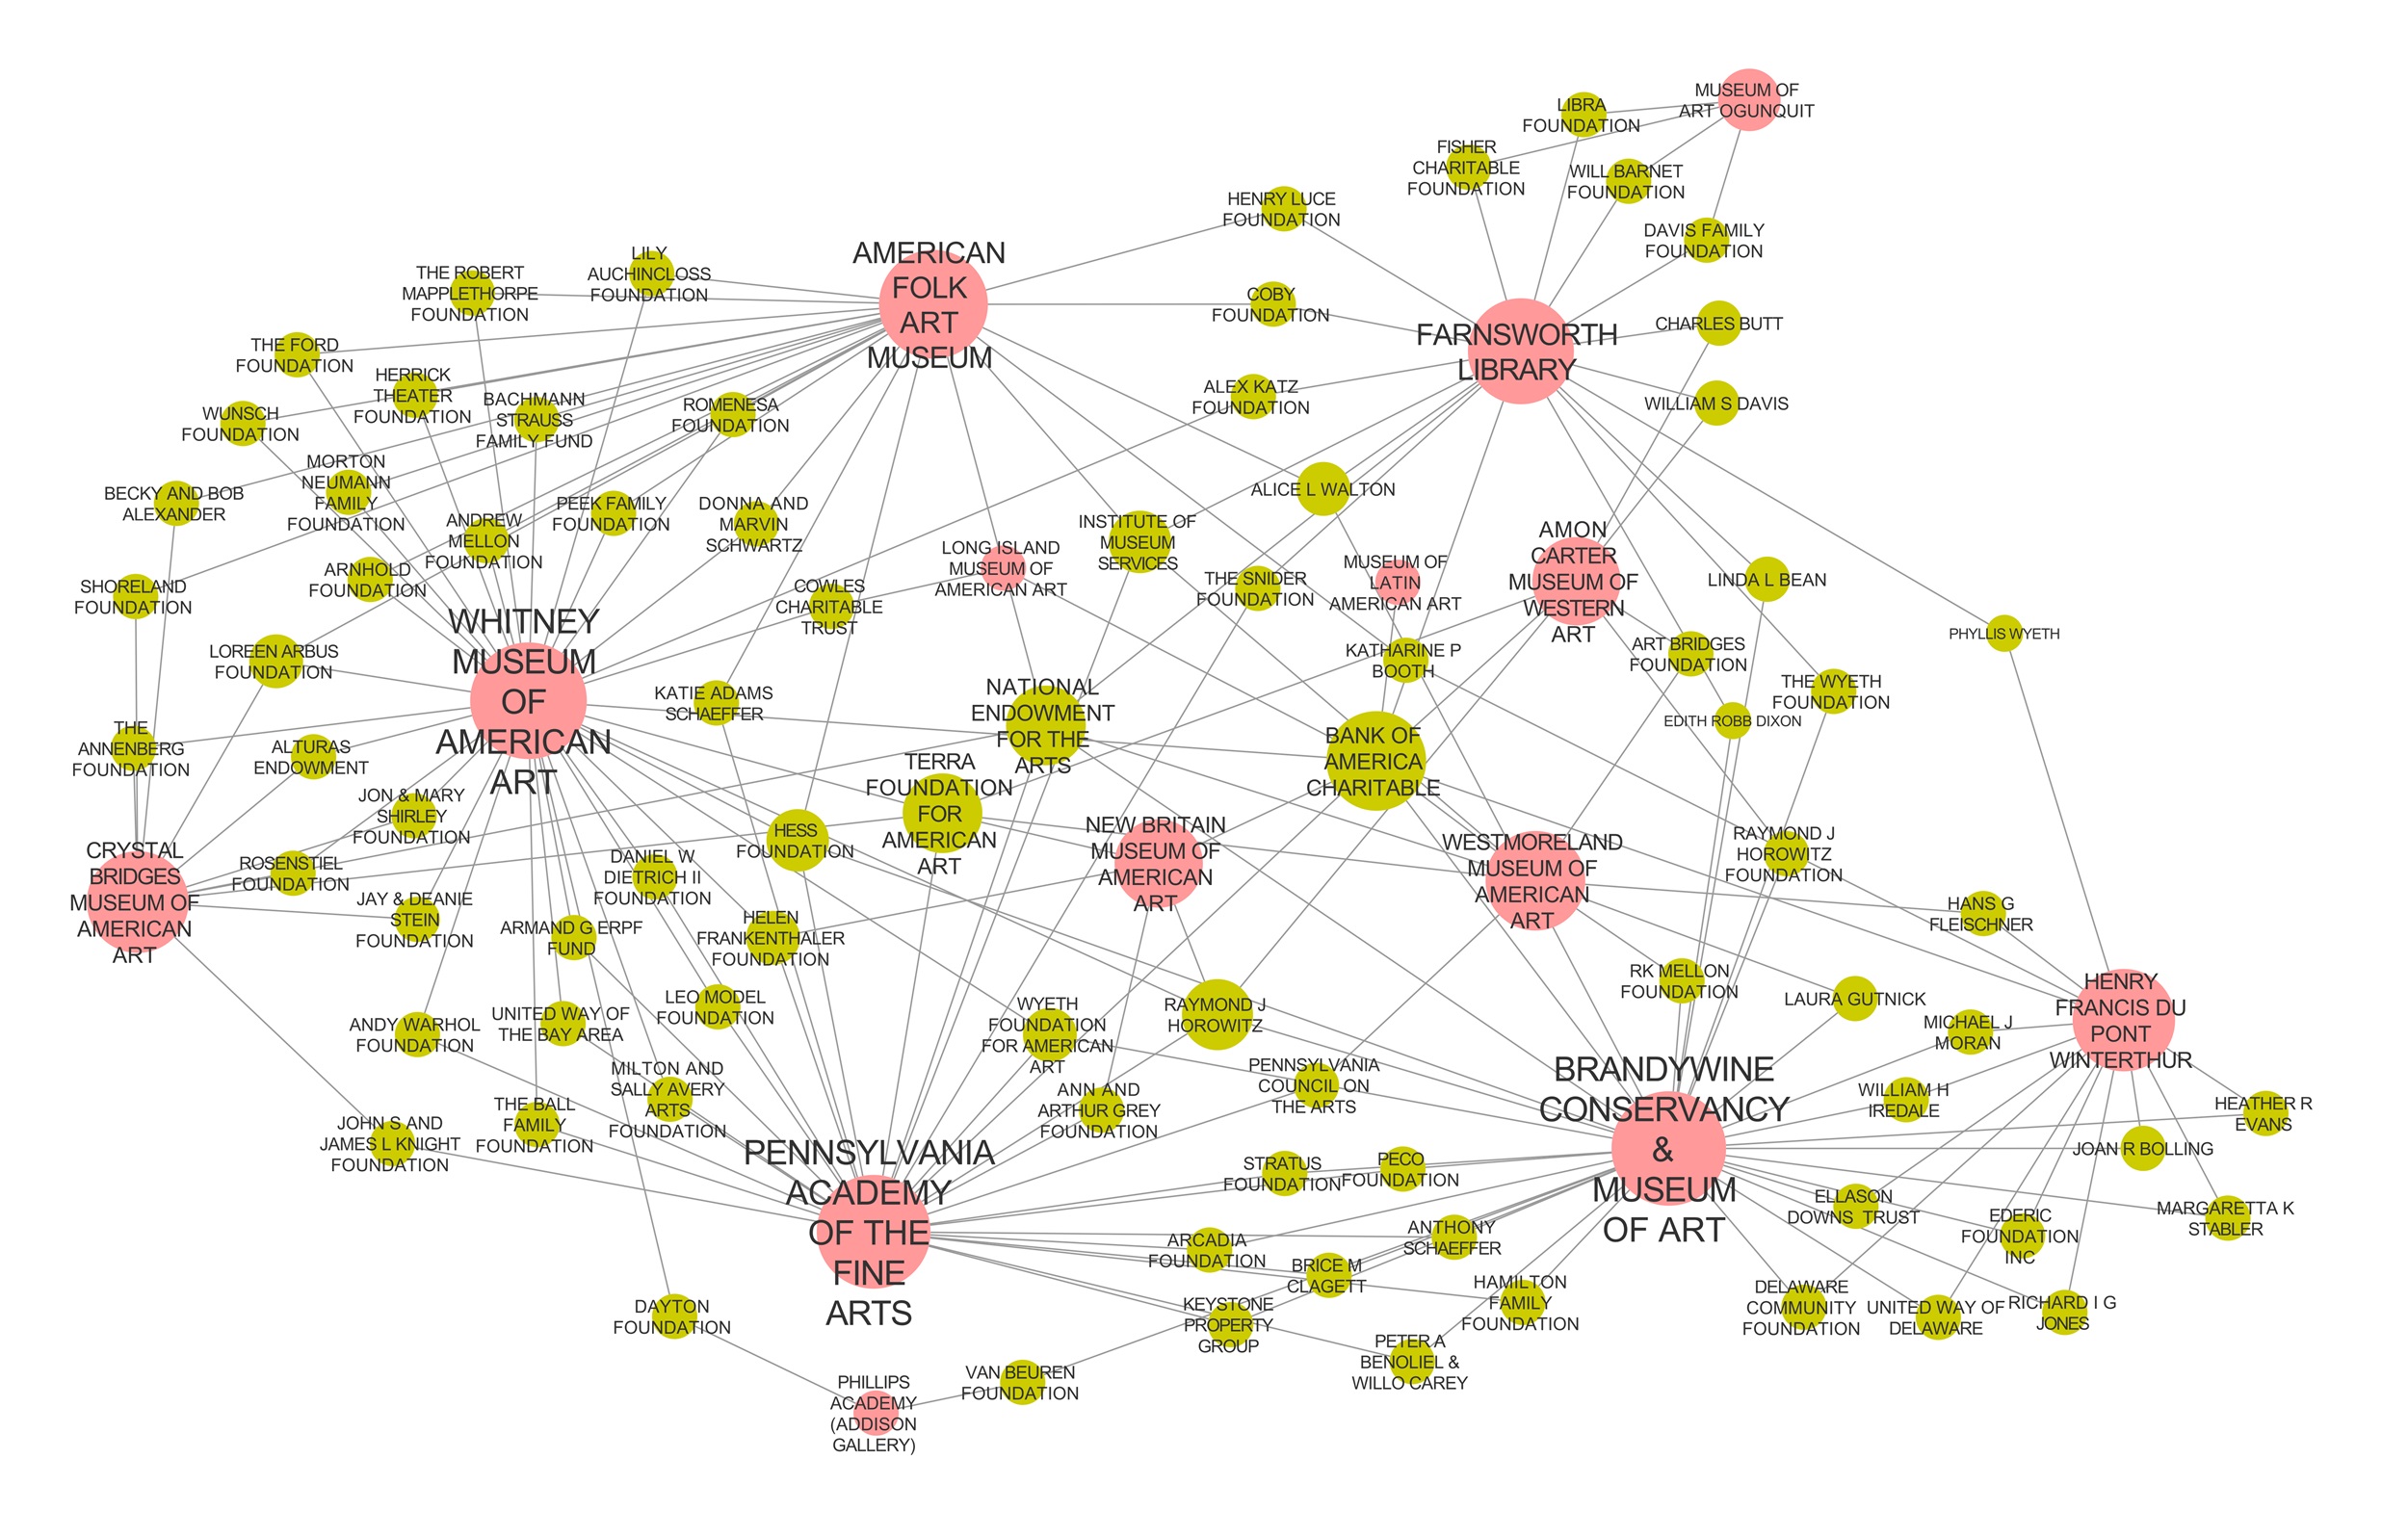 Network map incuding both foundations and individuals listed in annual reports. Two types of nodes are shown, with museums/recipient institutions in red and donors in gold. The network contains eighty-one donors who supported fourteen different institutions with a total of 189 donation relationships. Only relationships of donations of more than $1,000 are shown.